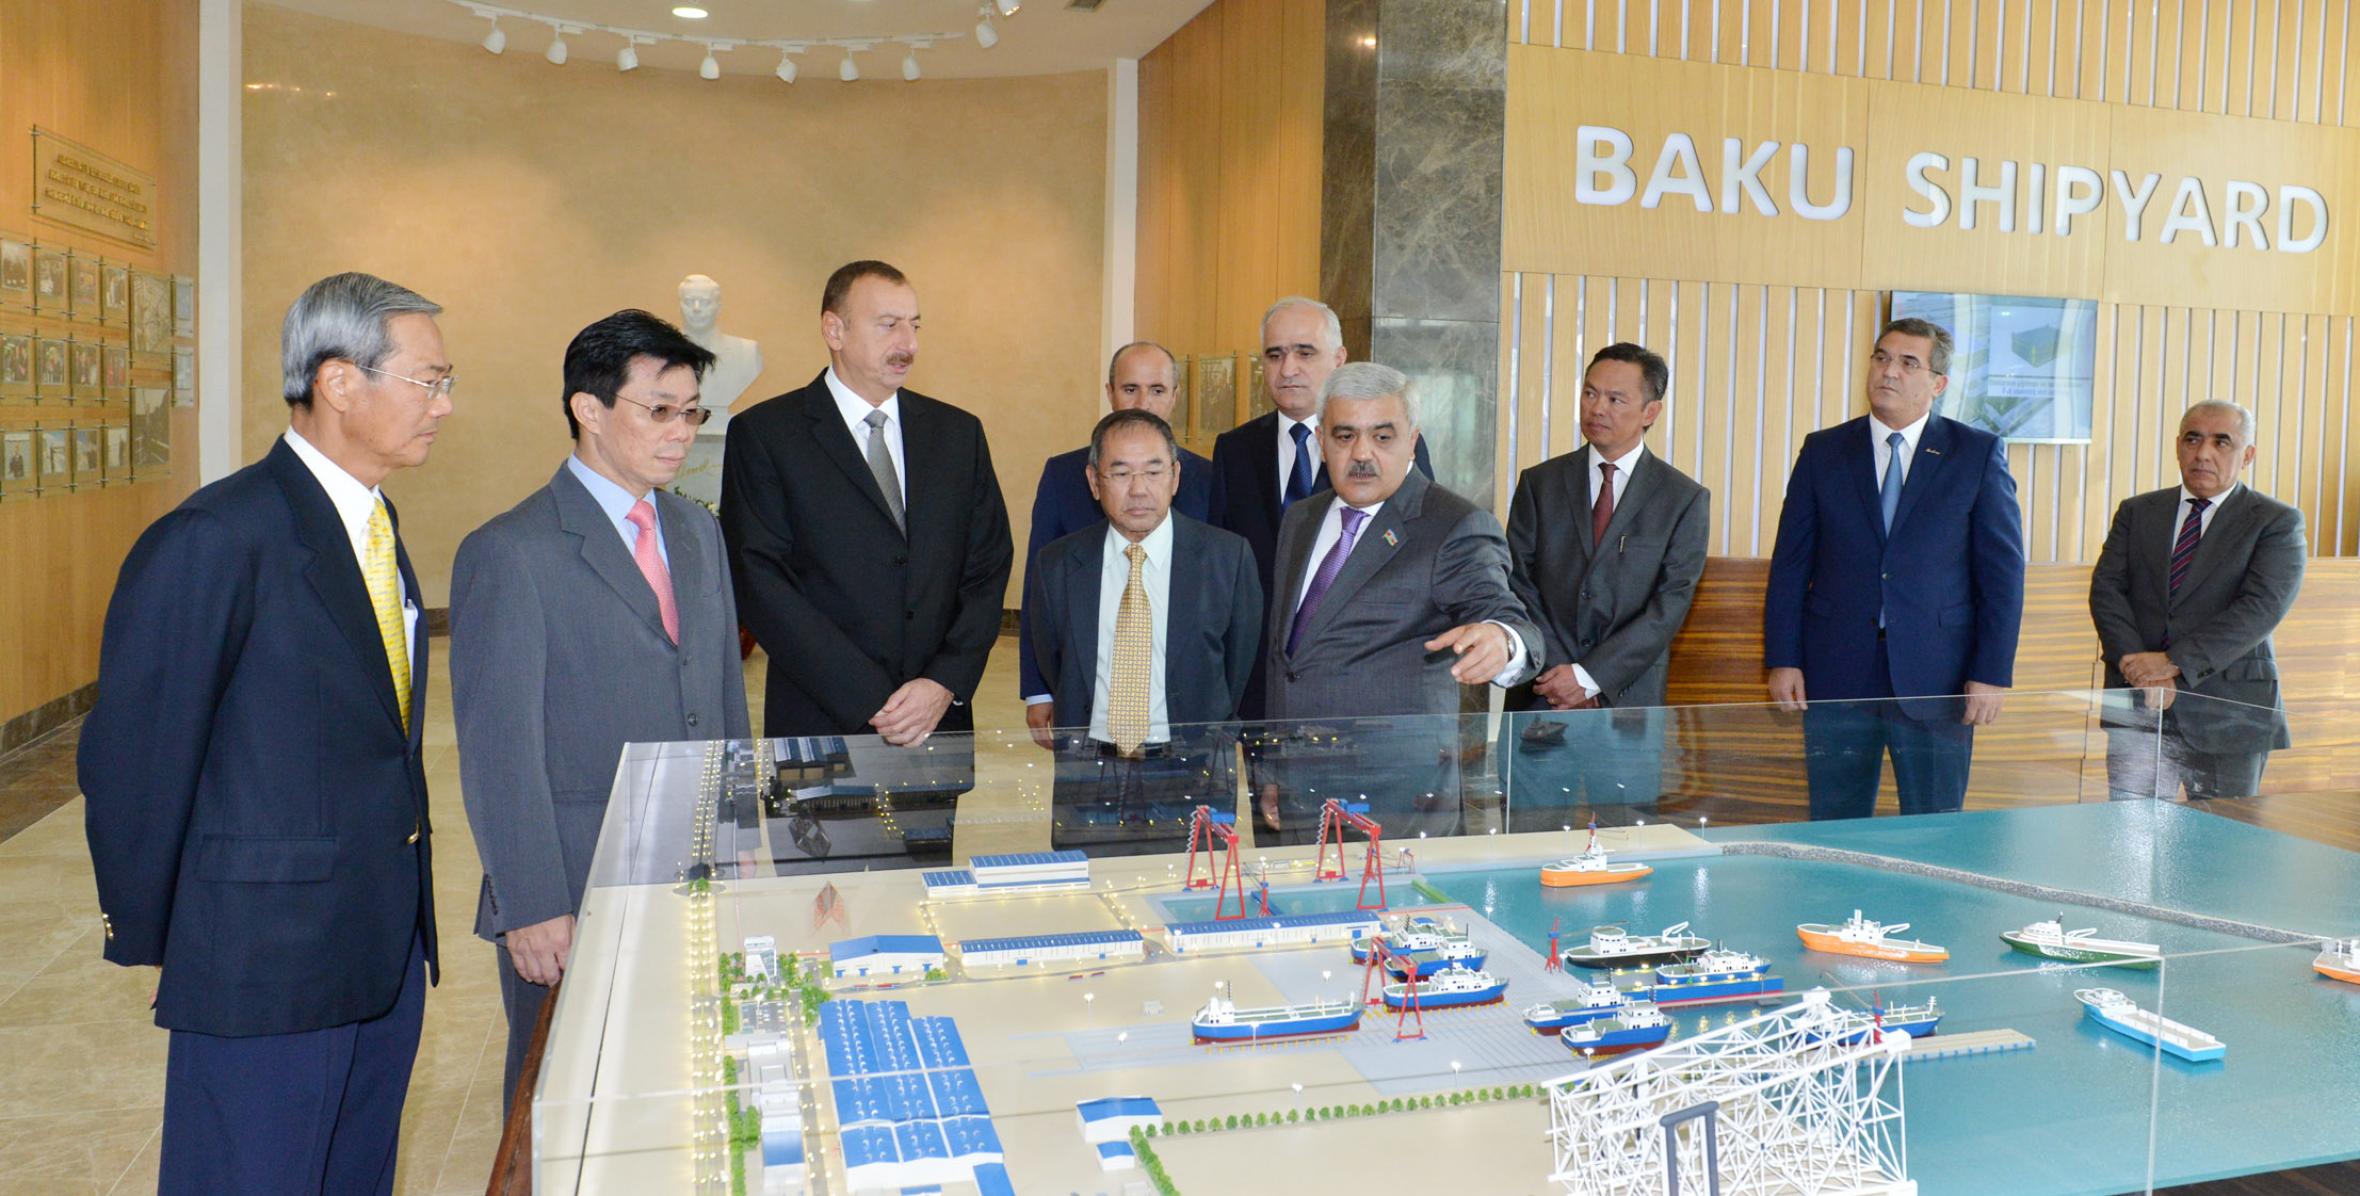 Ilham Aliyev attended the opening ceremony of the Baku Shipyard